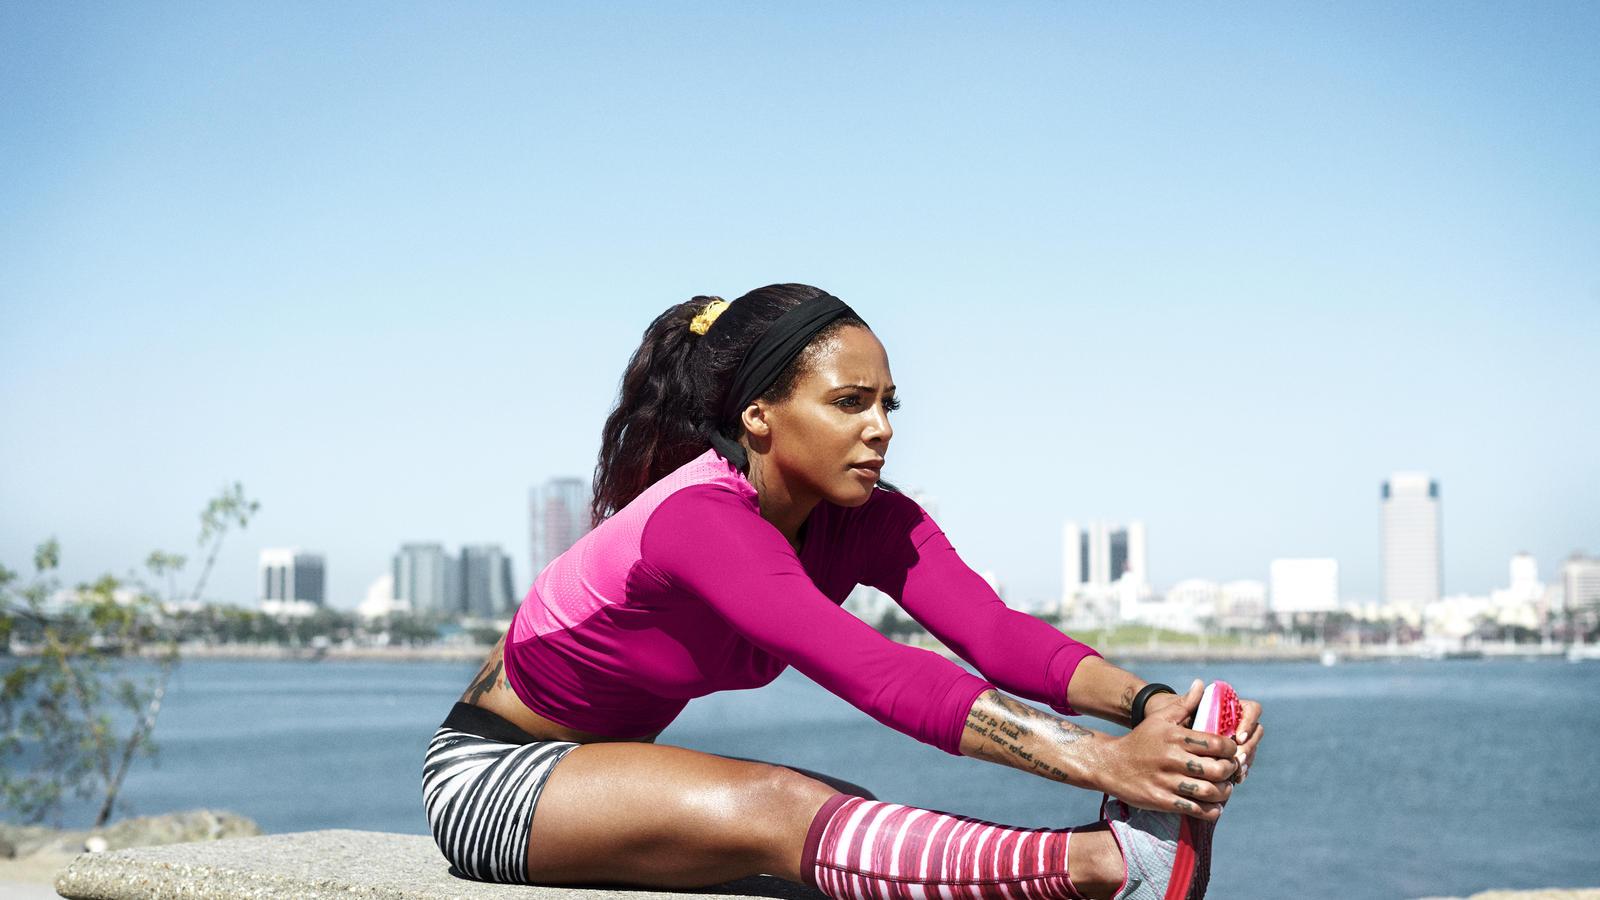 Sydney Leroux: Syd The Kid Amazing Life Story Of A Professional